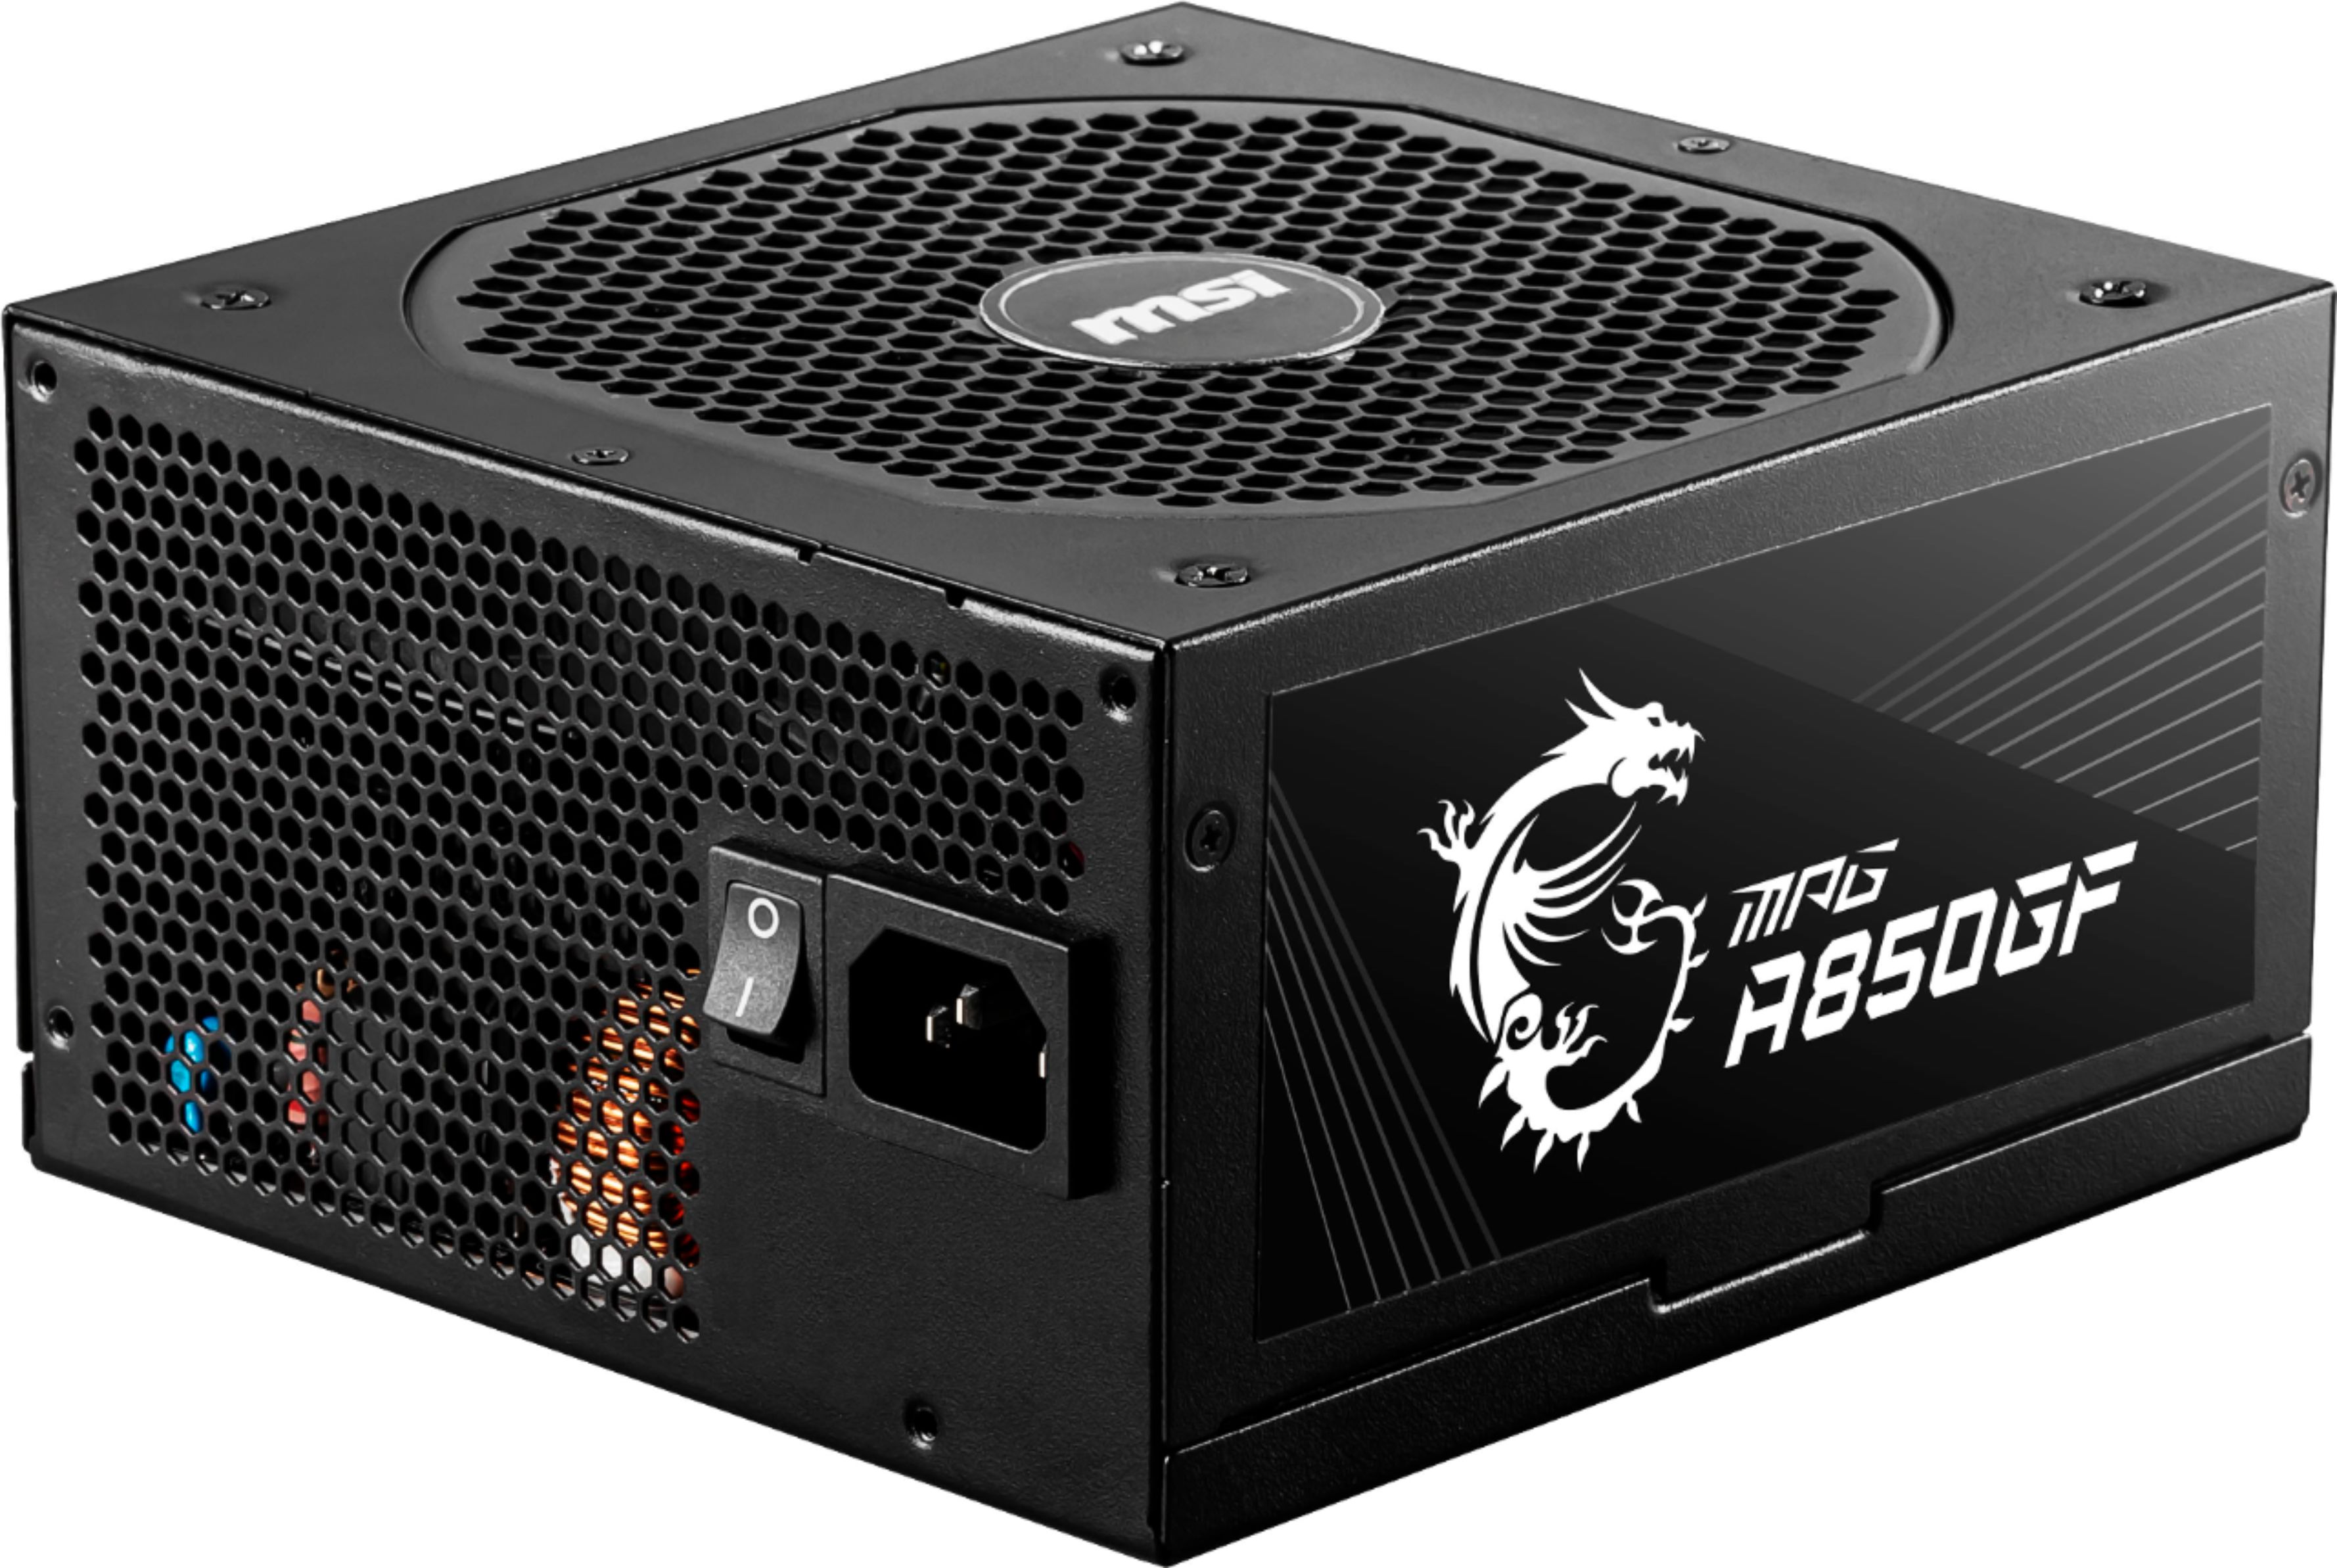  MSI MPG A850G PCIE 5 & ATX 3.0 Gaming Power Supply - Full  Modular - 80 Plus Gold Certified 850W - 100% Japanese 105°C Capacitors -  Compact Size - ATX PSU : Everything Else